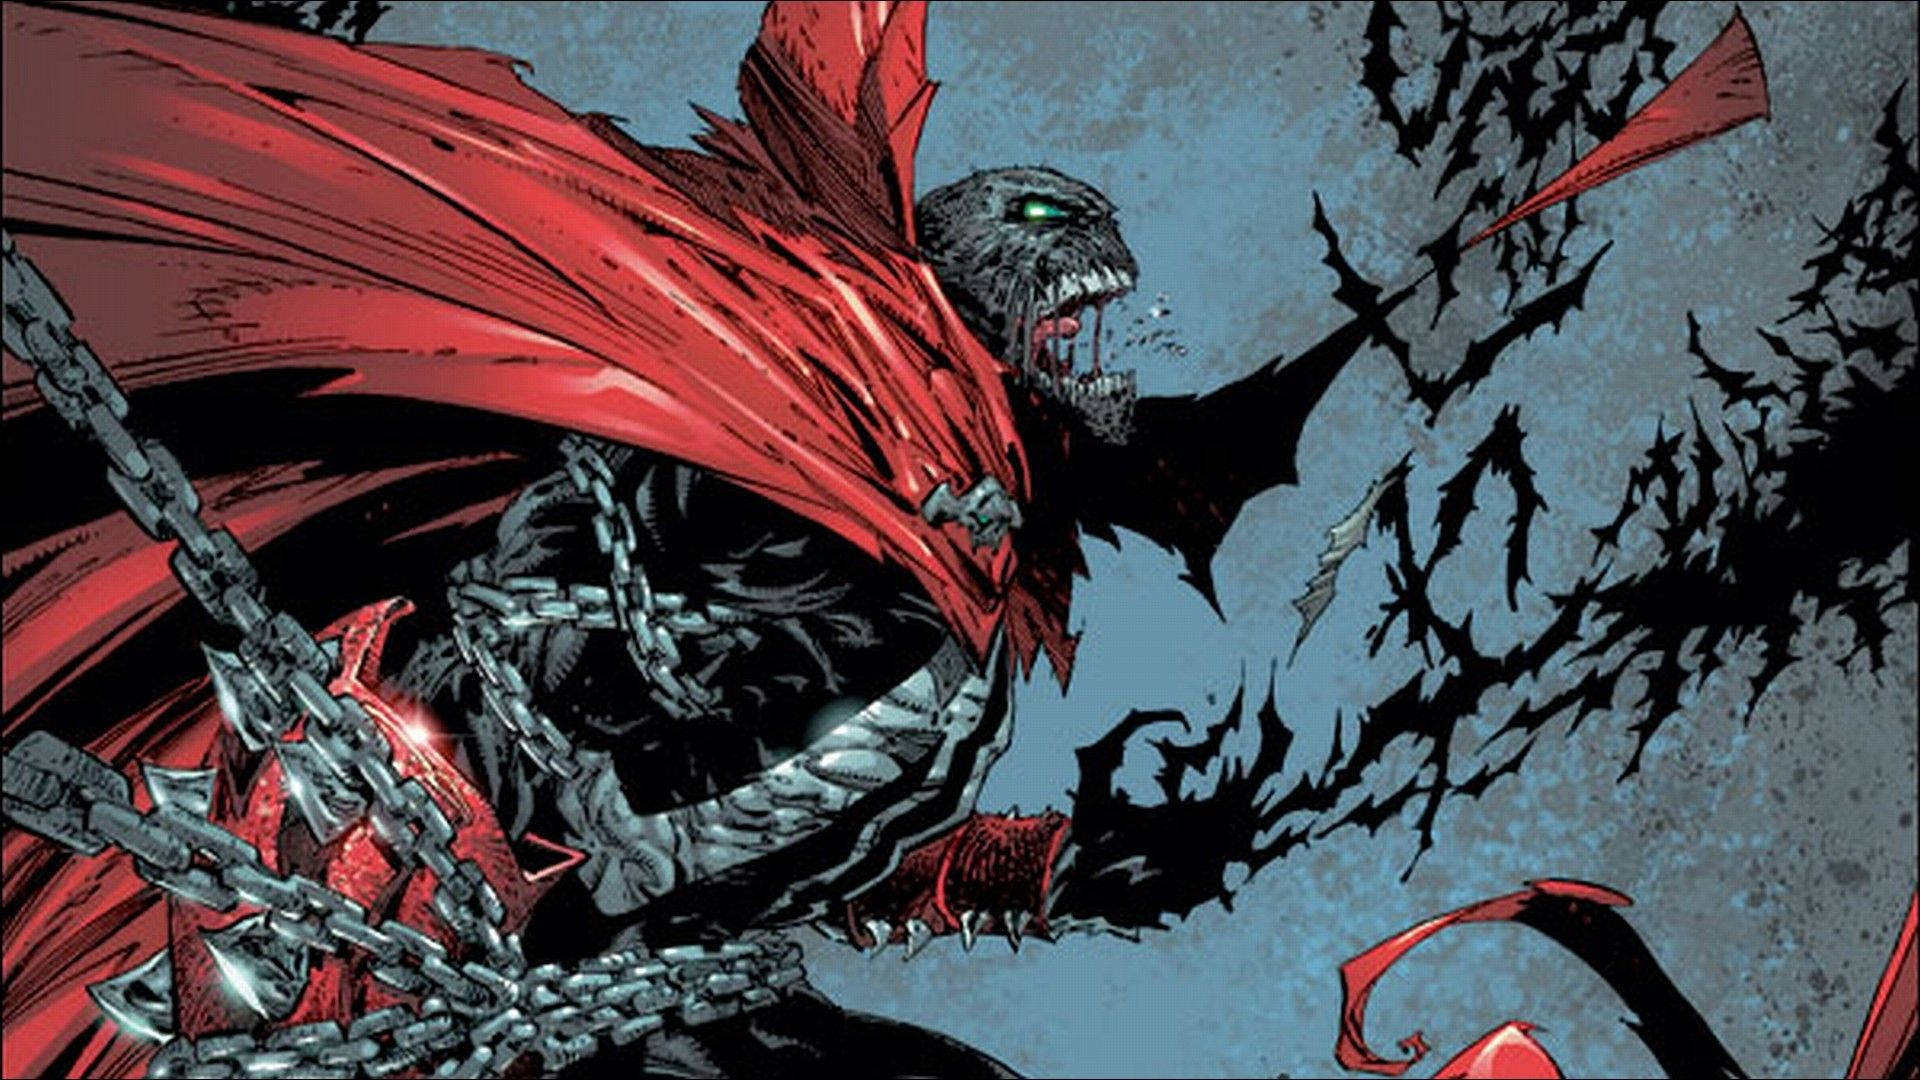 Fierce Illustration of Spawn from the Renowned Comic Series Wallpaper